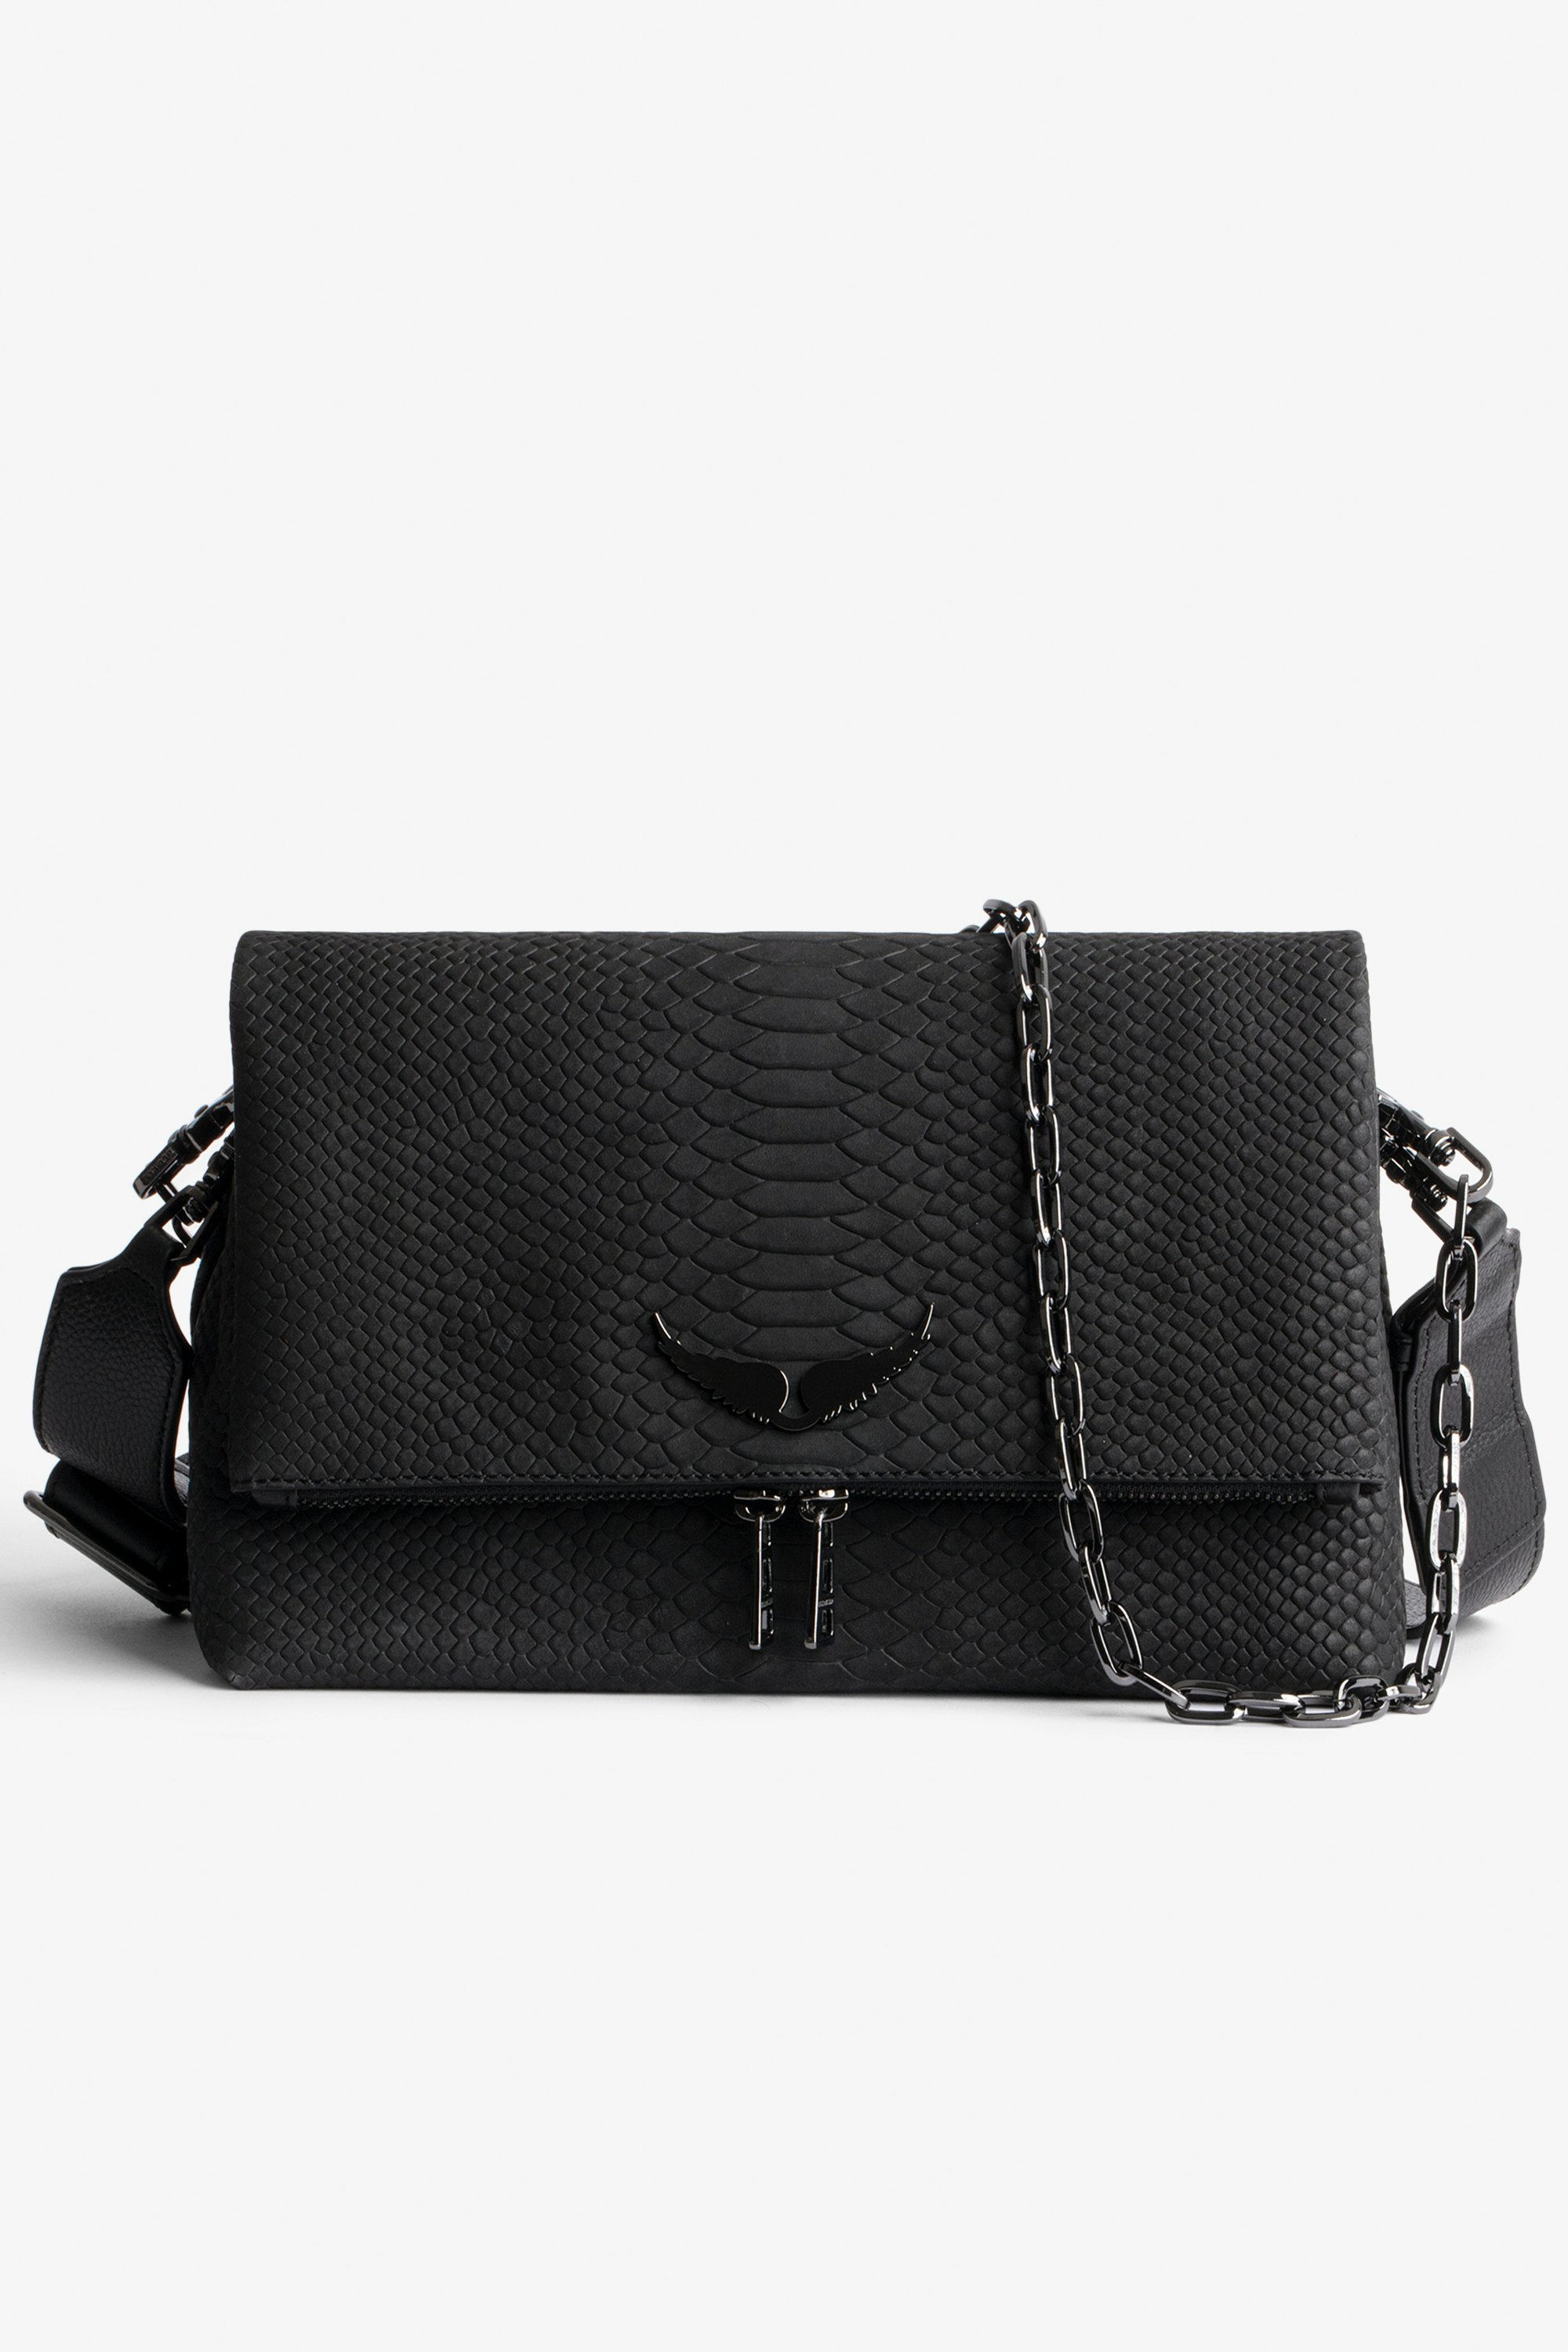 Soft Savage Rocky Bag Women’s bag in black python-effect leather with a chain shoulder strap